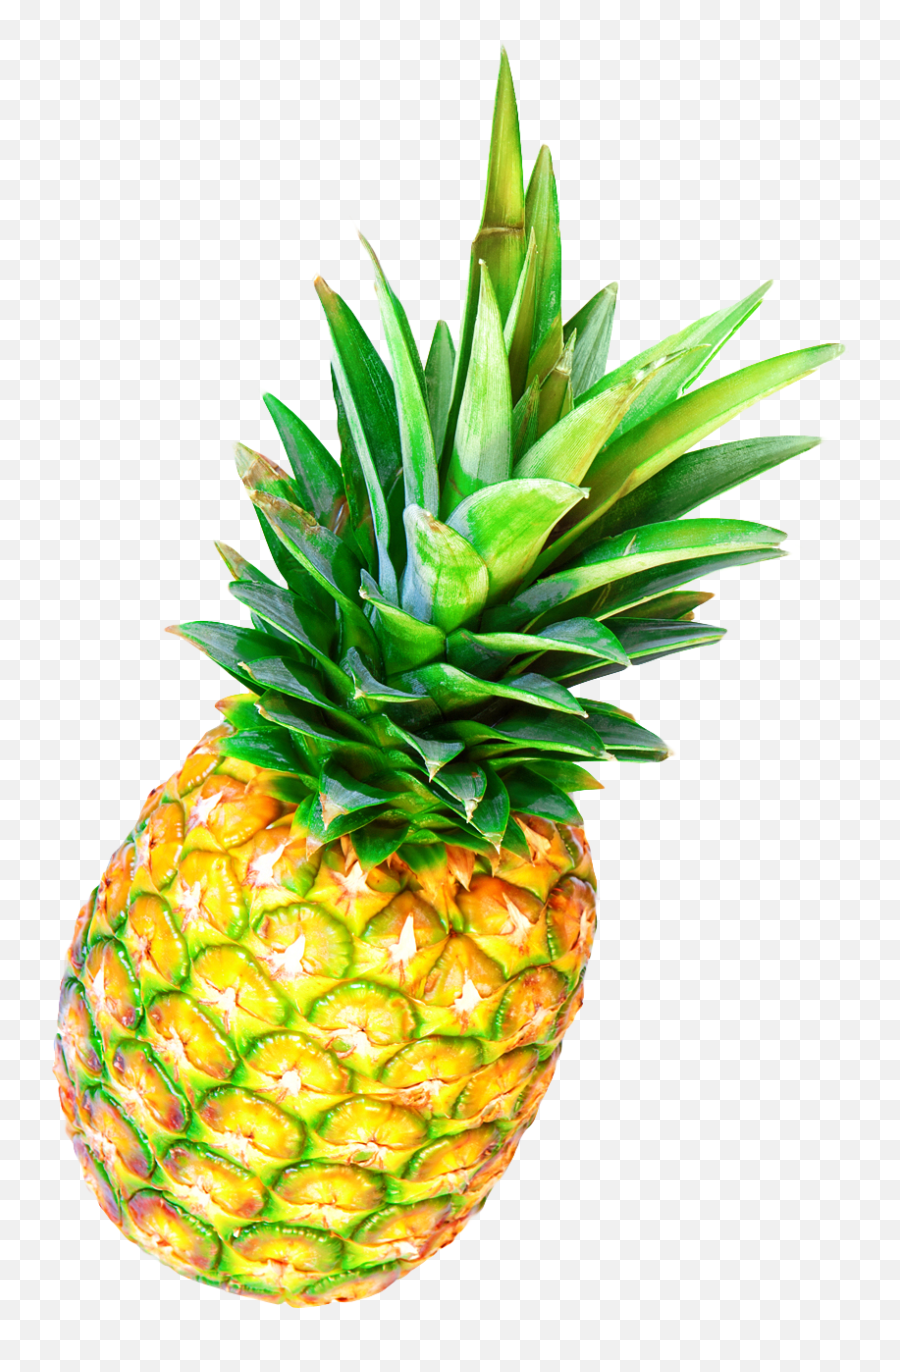 Pineapple Png Image - Pngpix Pineapple Fruit Png,Pinapple Png